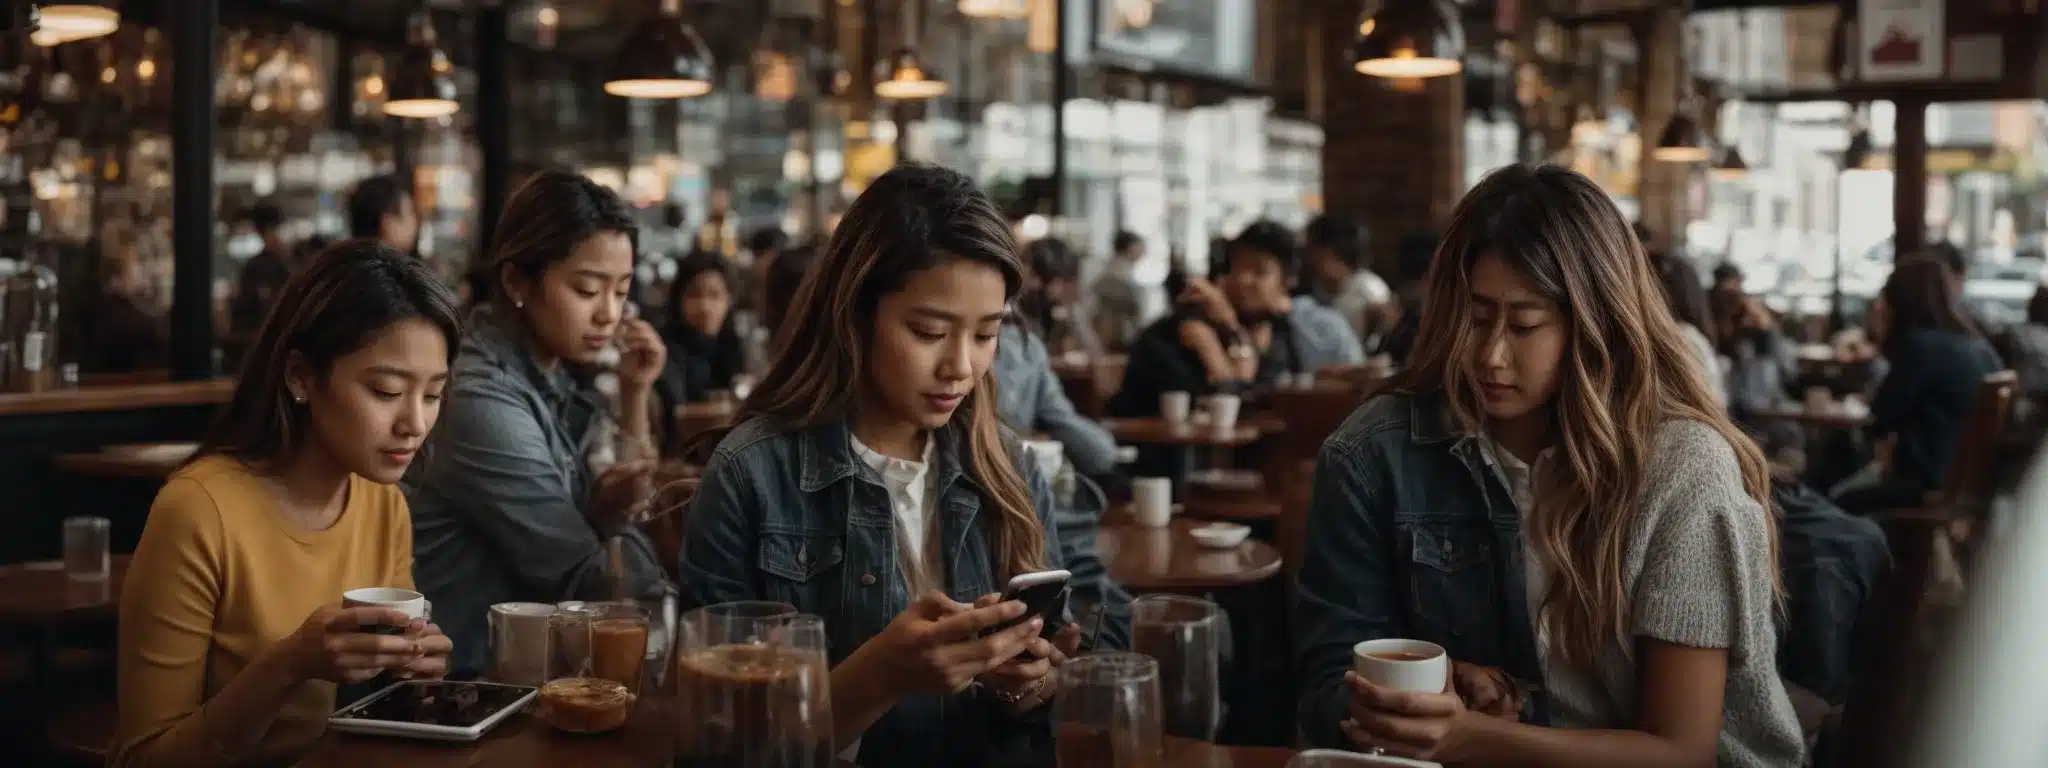 A Bustling Cafe With Individuals Deeply Engaged With Their Smartphones, Their Expressions Reflecting A World Of Interactions Beyond The Screen.